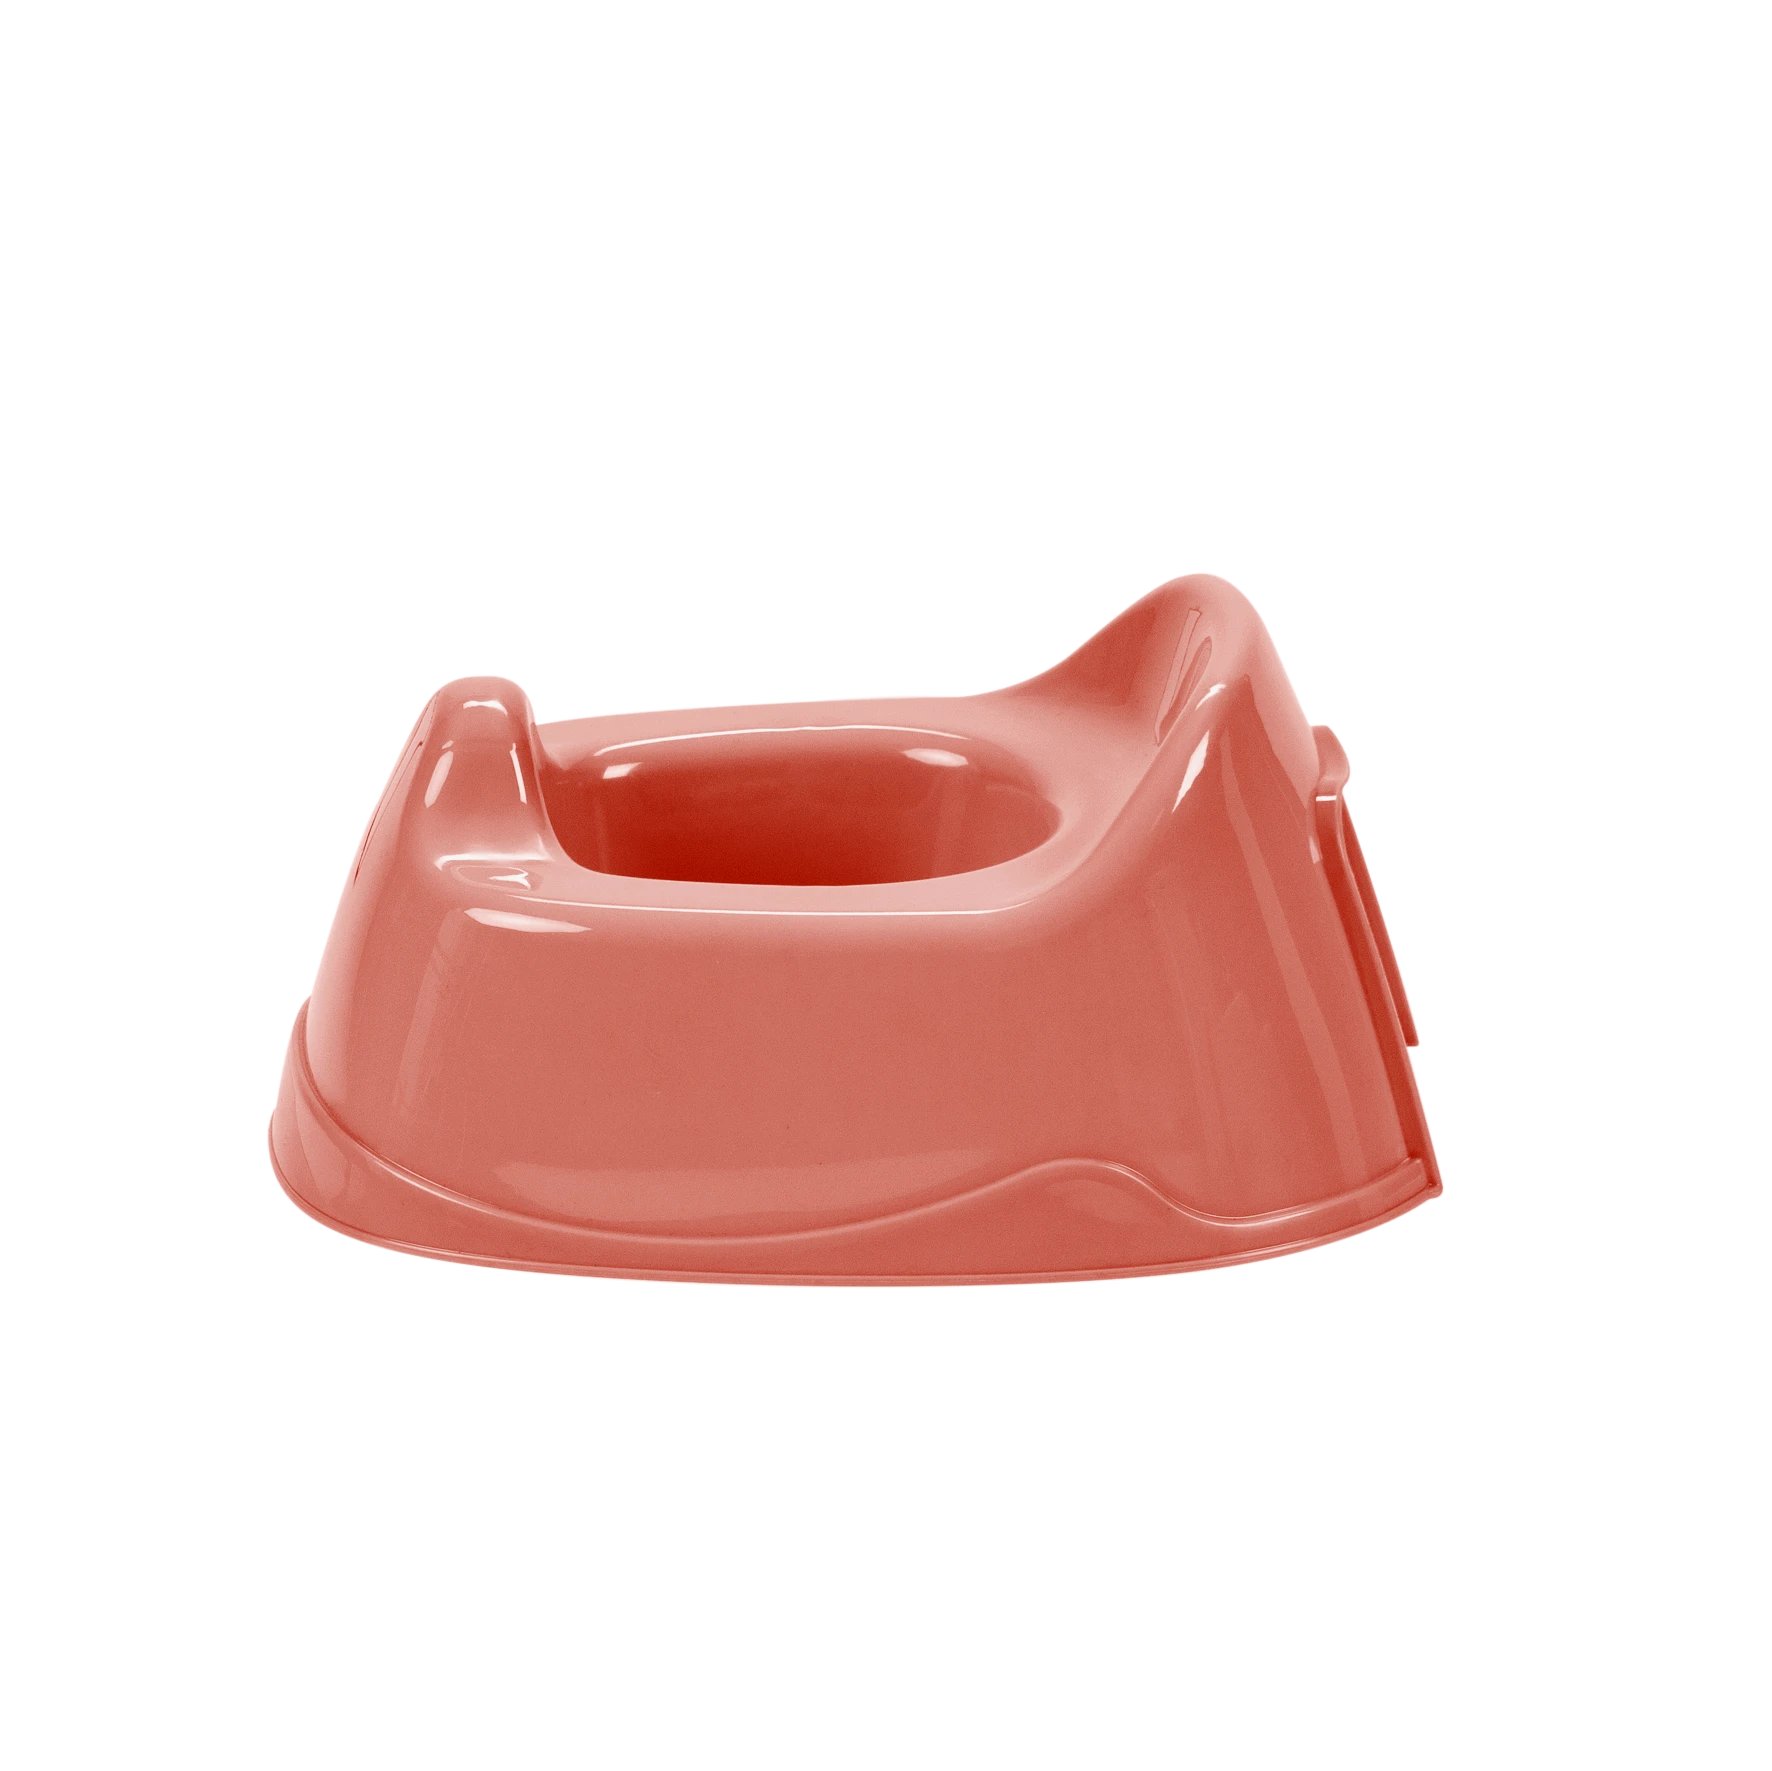 Notoro Baby Potty Pink Red Custom Suitable For Baby Supplies Quality Product From Vietnam